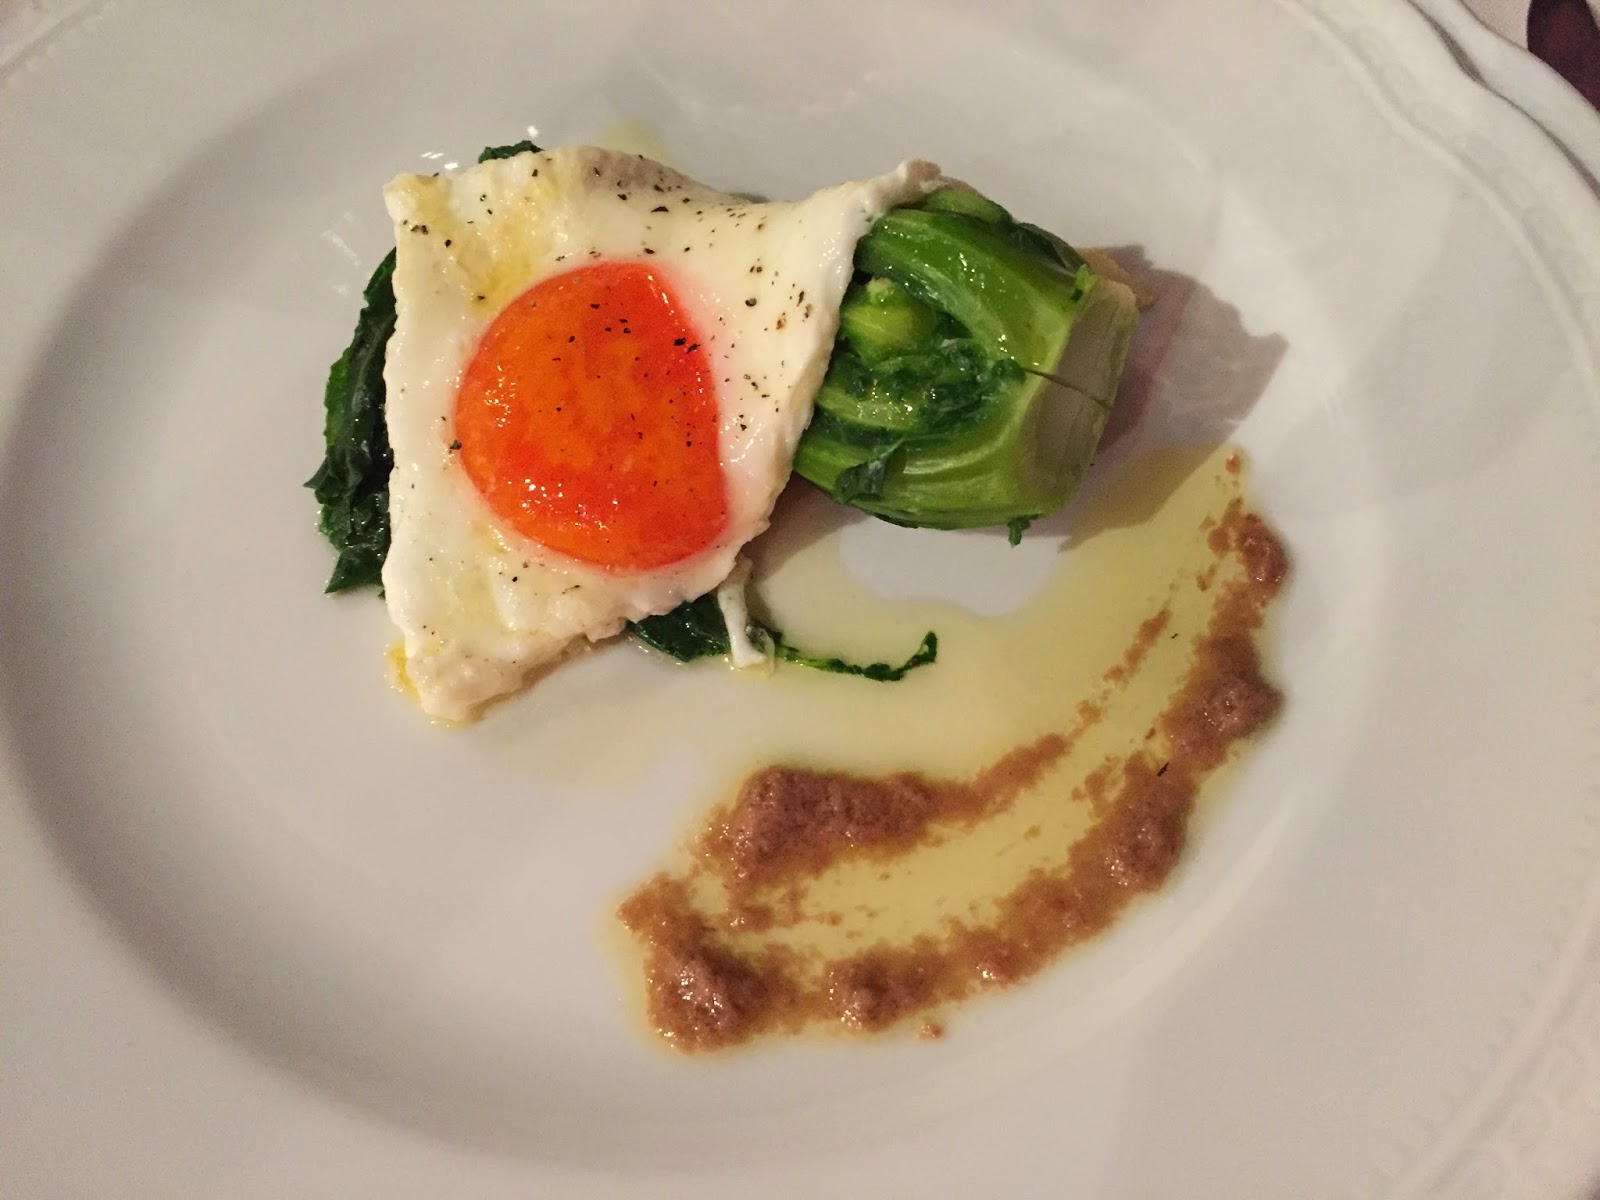 Egg with broccoli and anchovy paste